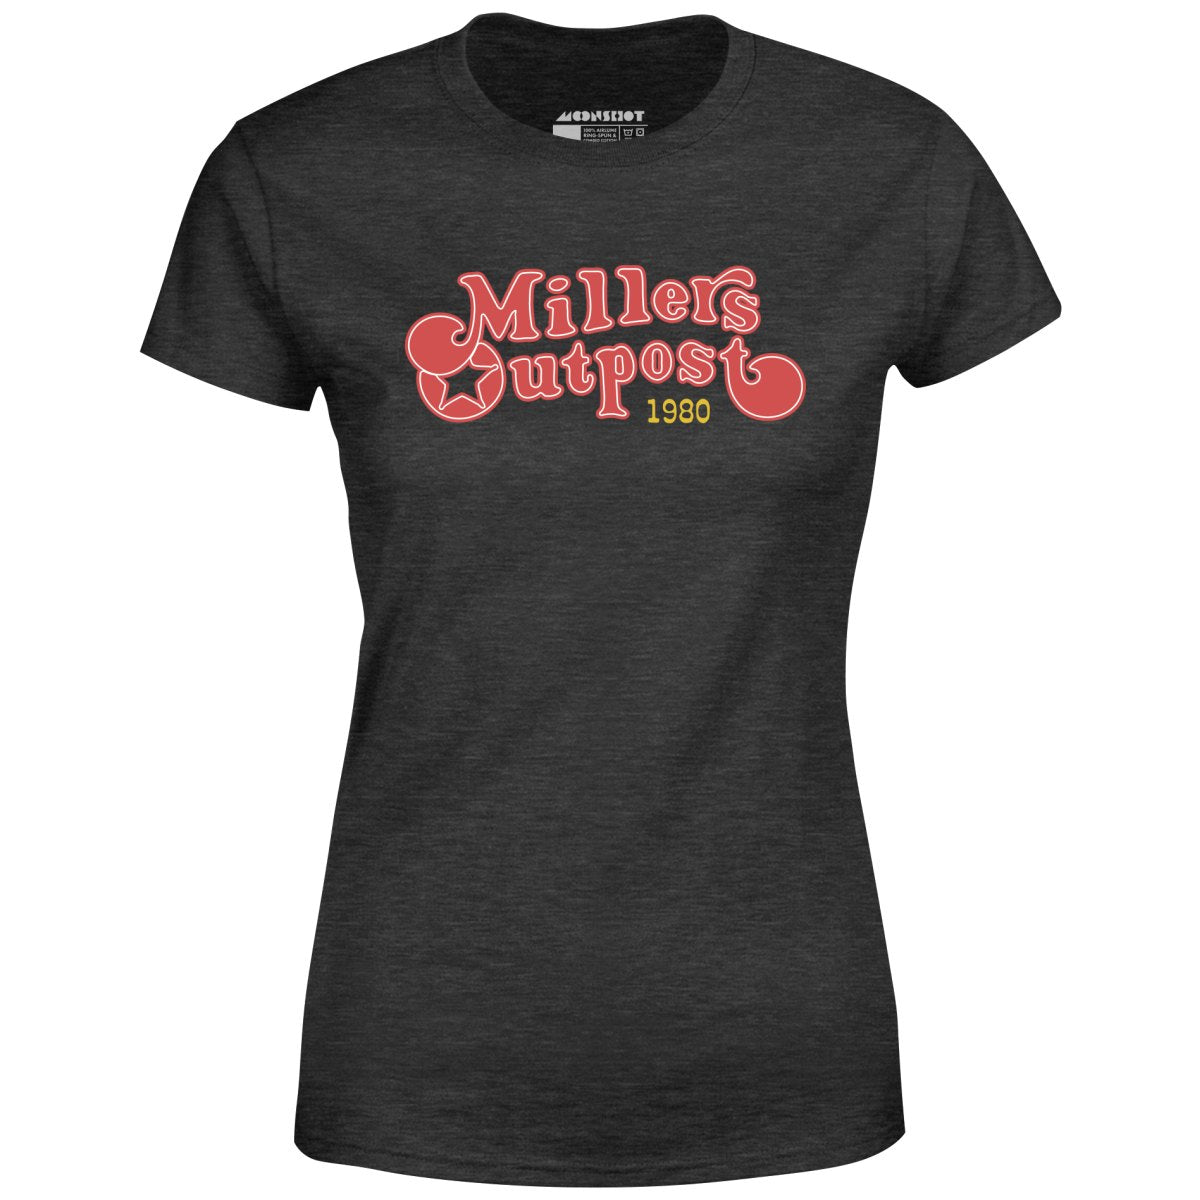 Millers Outpost - Women's T-Shirt